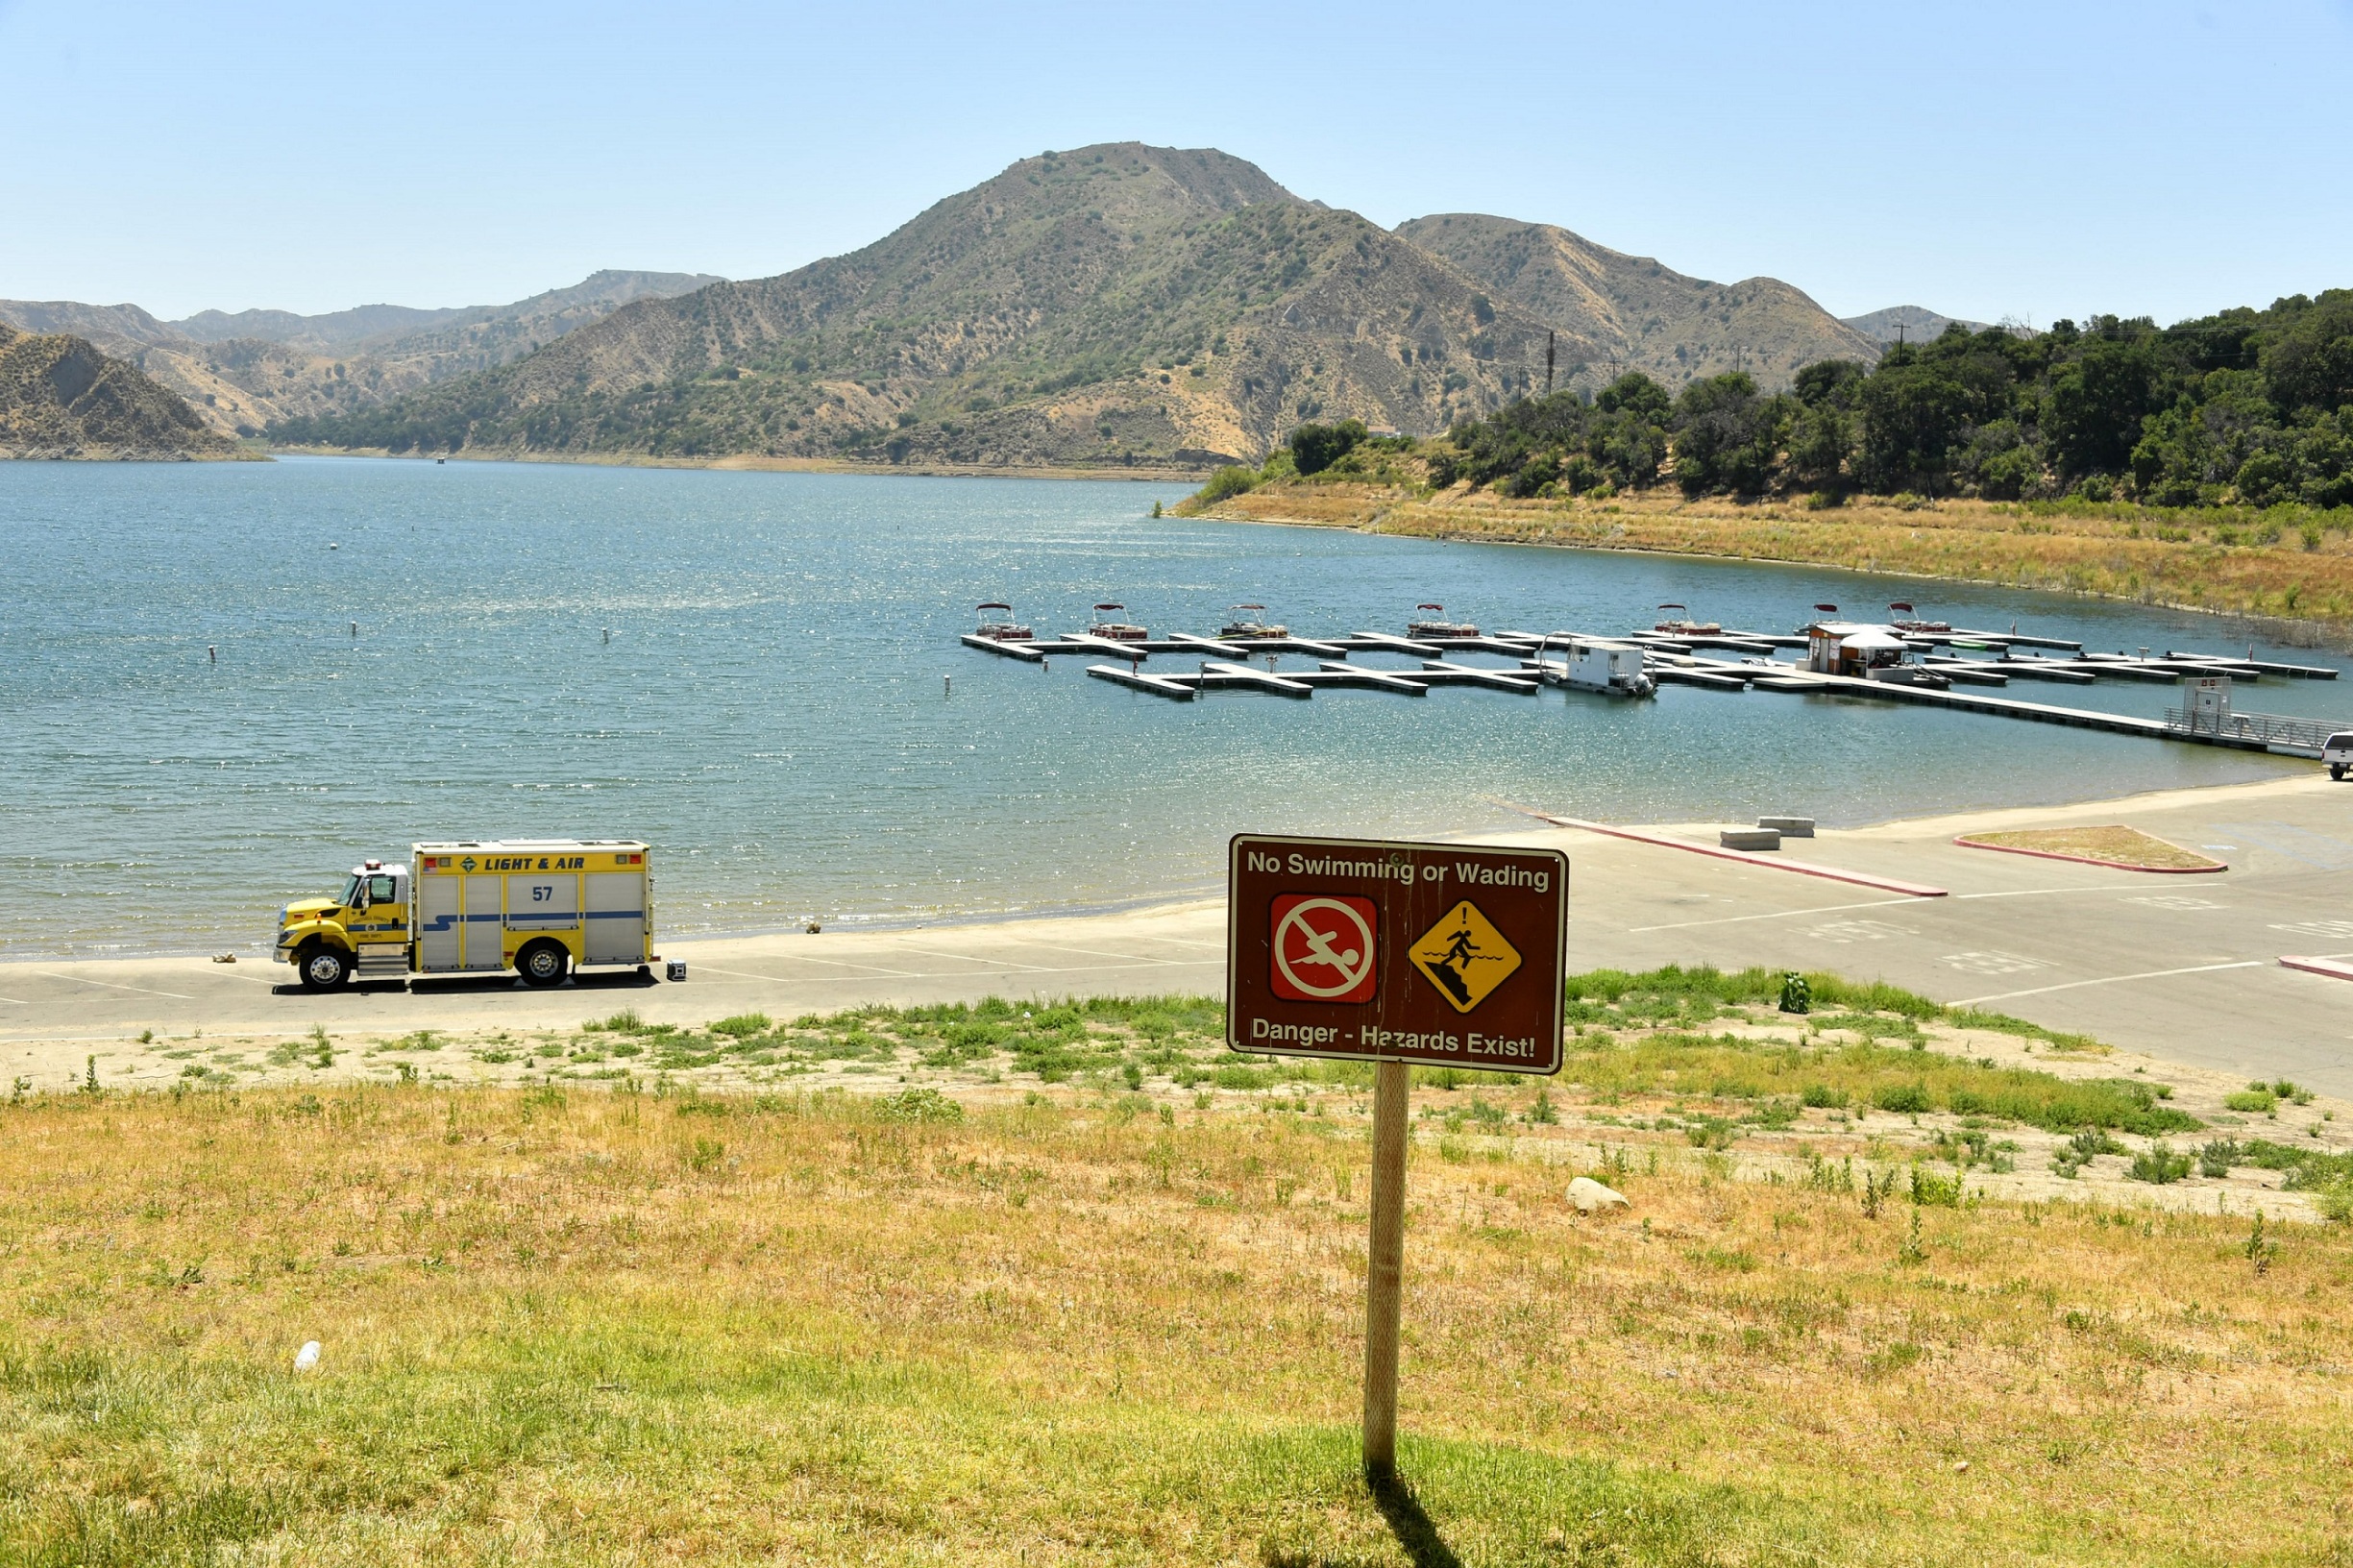 PIRU, CALIFORNIA - JULY 09:  An emergency response vehicle sits in a parking lot near a danger sign warning visitor of hazards for swimming and wading at Lake Piru, where actress Naya Rivera was reported missing Wednesday, on July 9, 2020 in Piru, California.  Rivera, known for her role in 